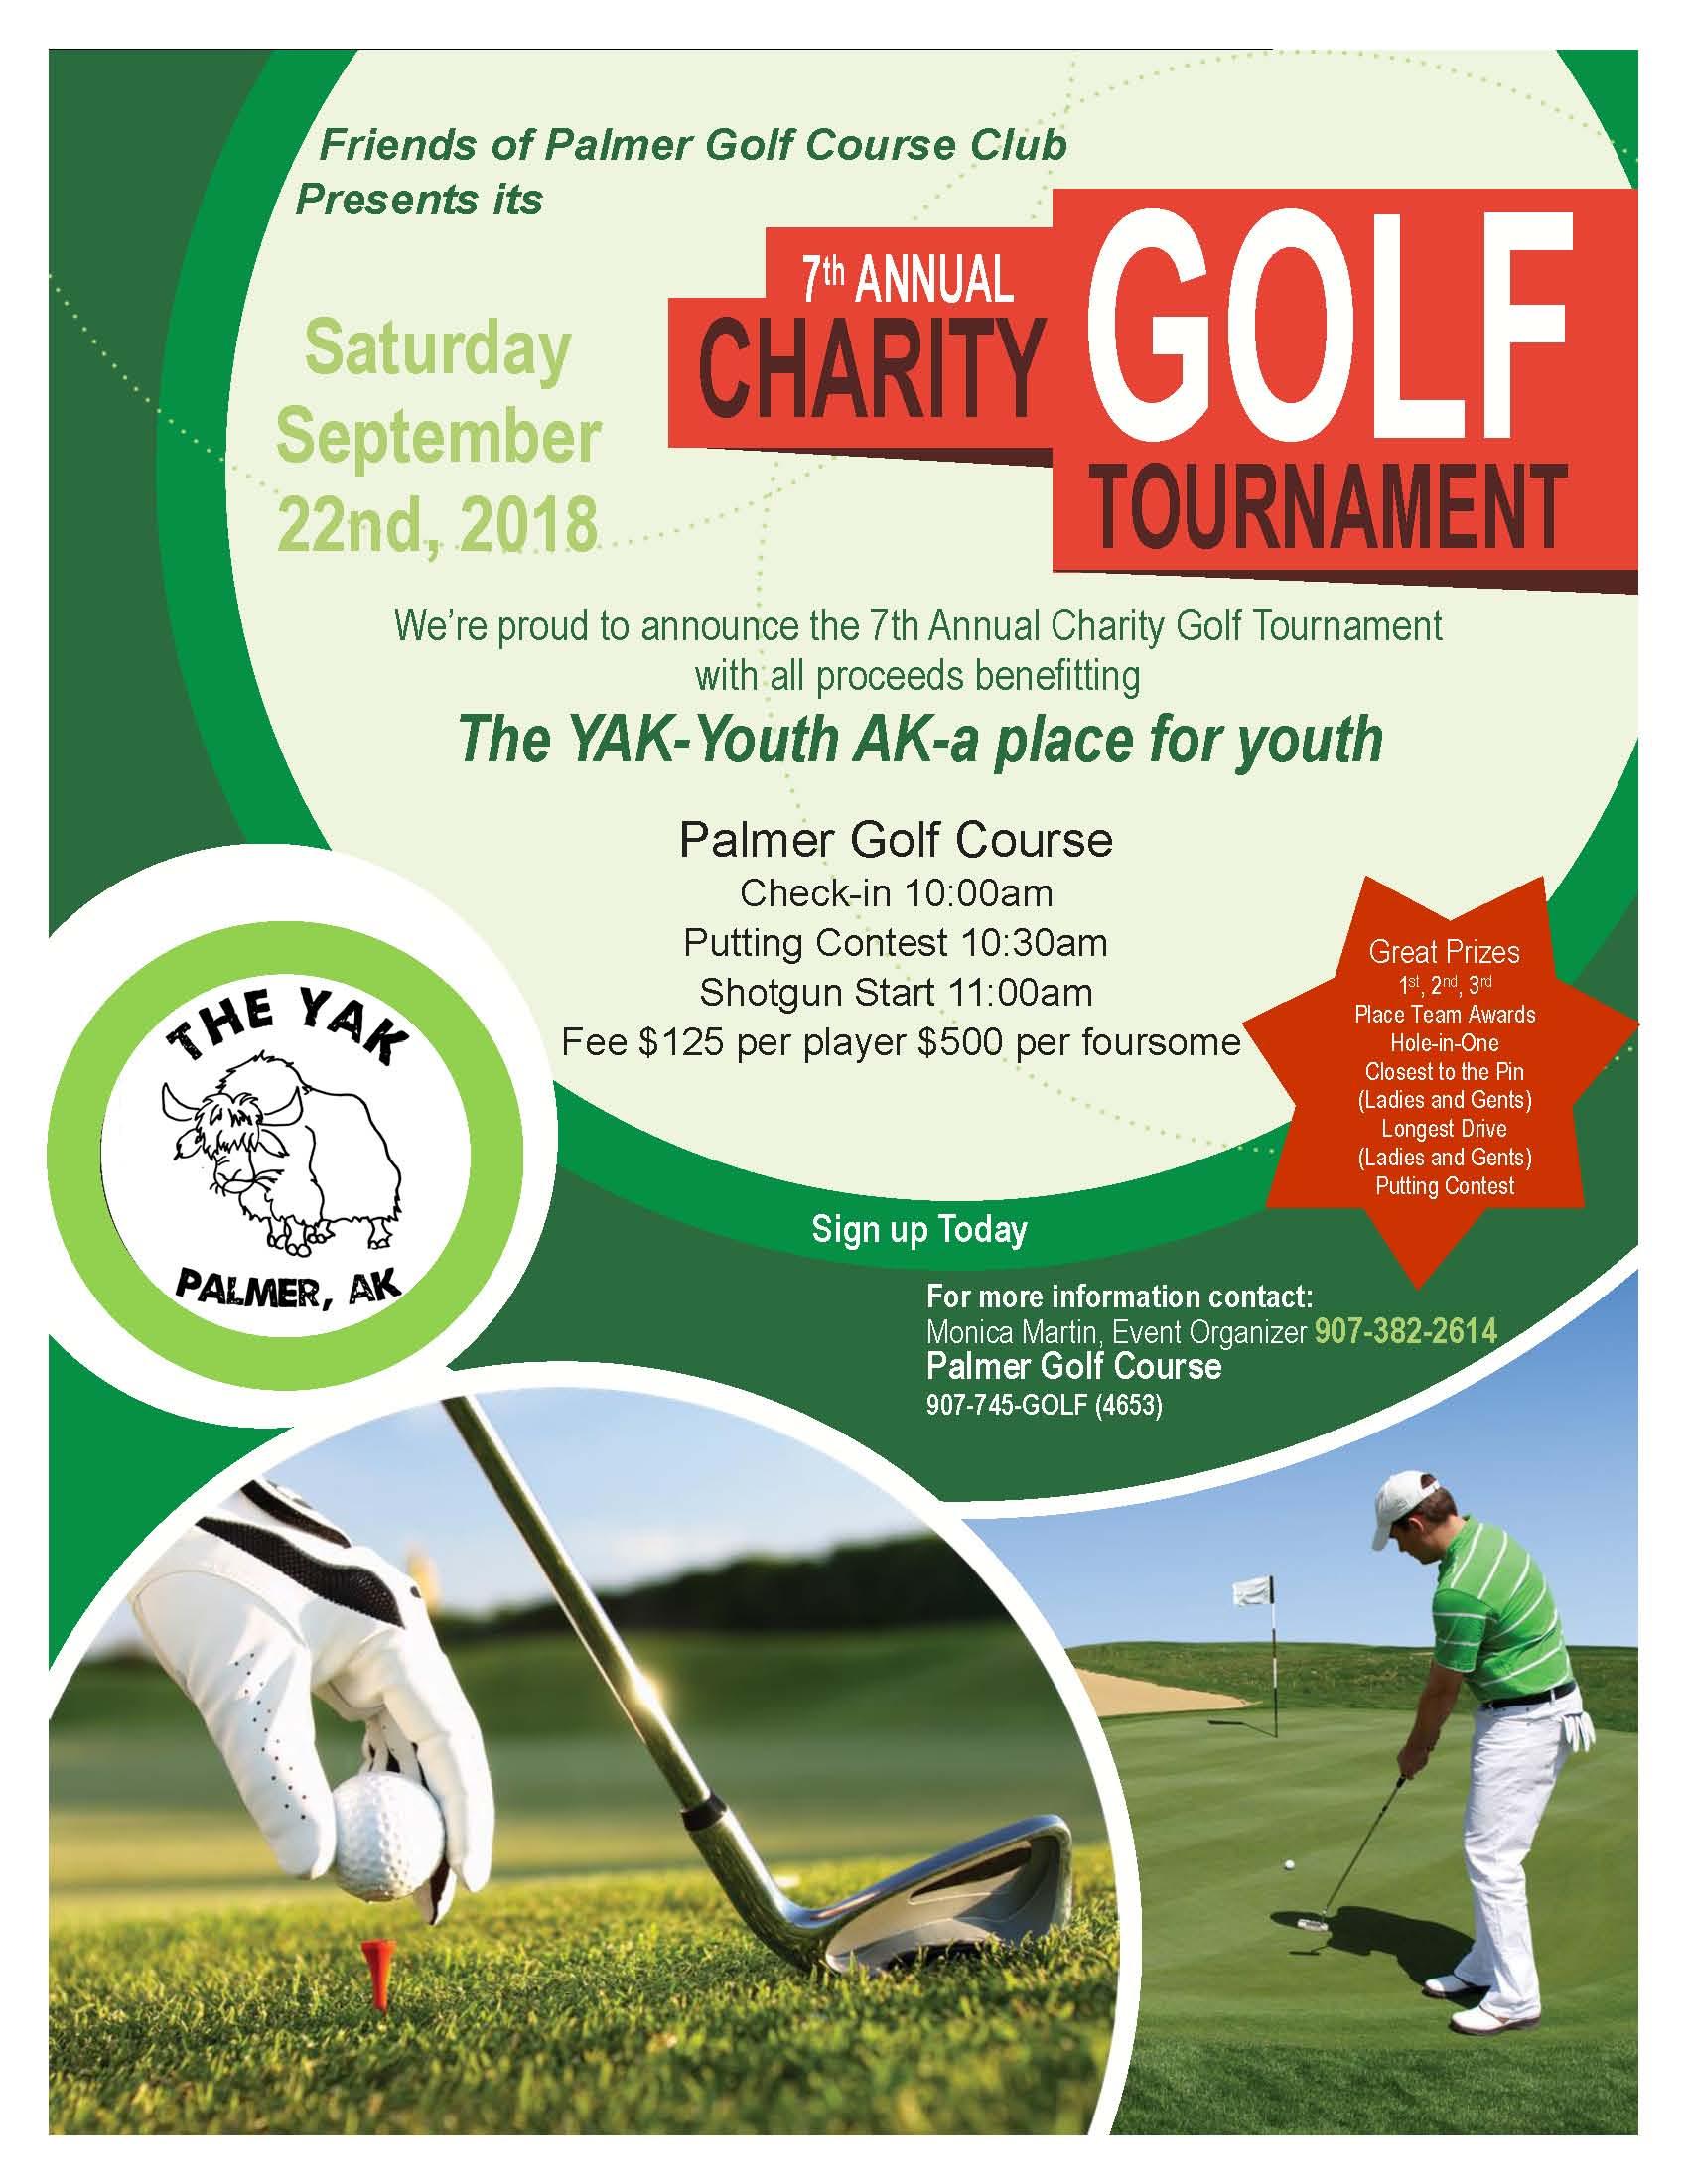 7th Annual Charity Golf Tournament presented by Friends of Palmer Golf Course Club